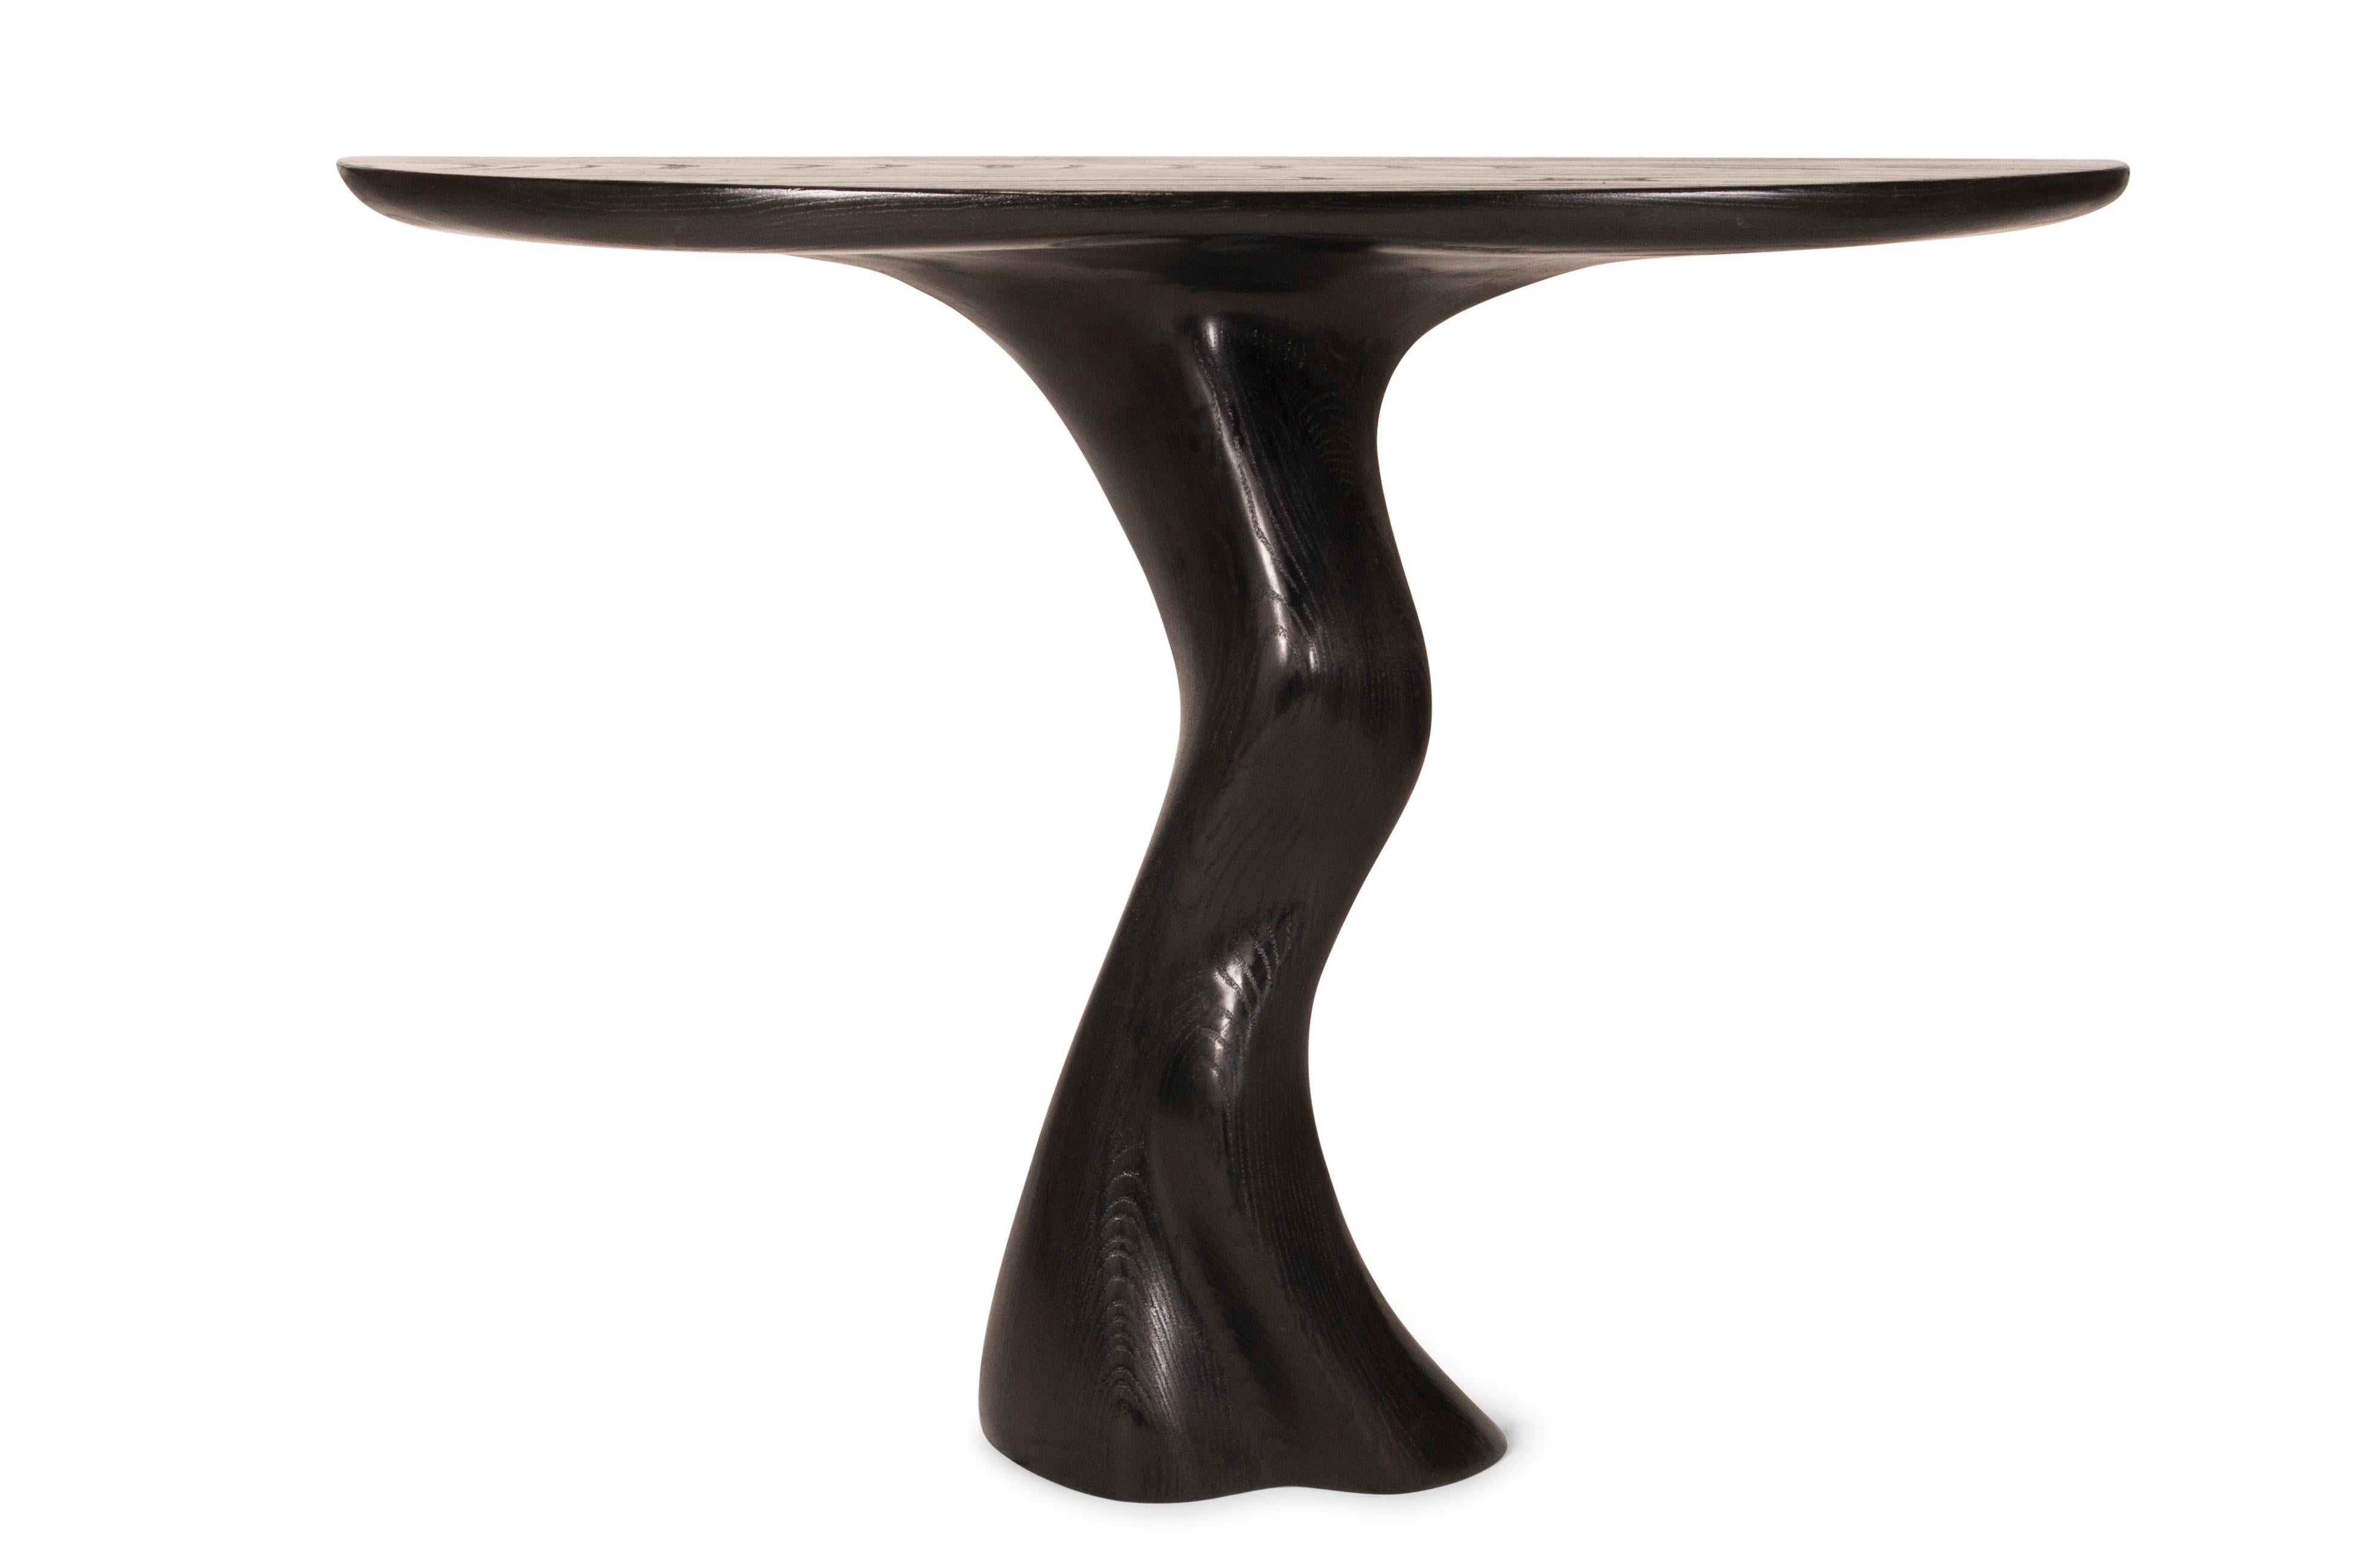 Haya console table is a stylish futuristic sculptural art table with a organic form designed and manufactured by Amorph. Haya console table is made out of solid wood and stained. 
The dimension of the piece can be modified upon your request.

About